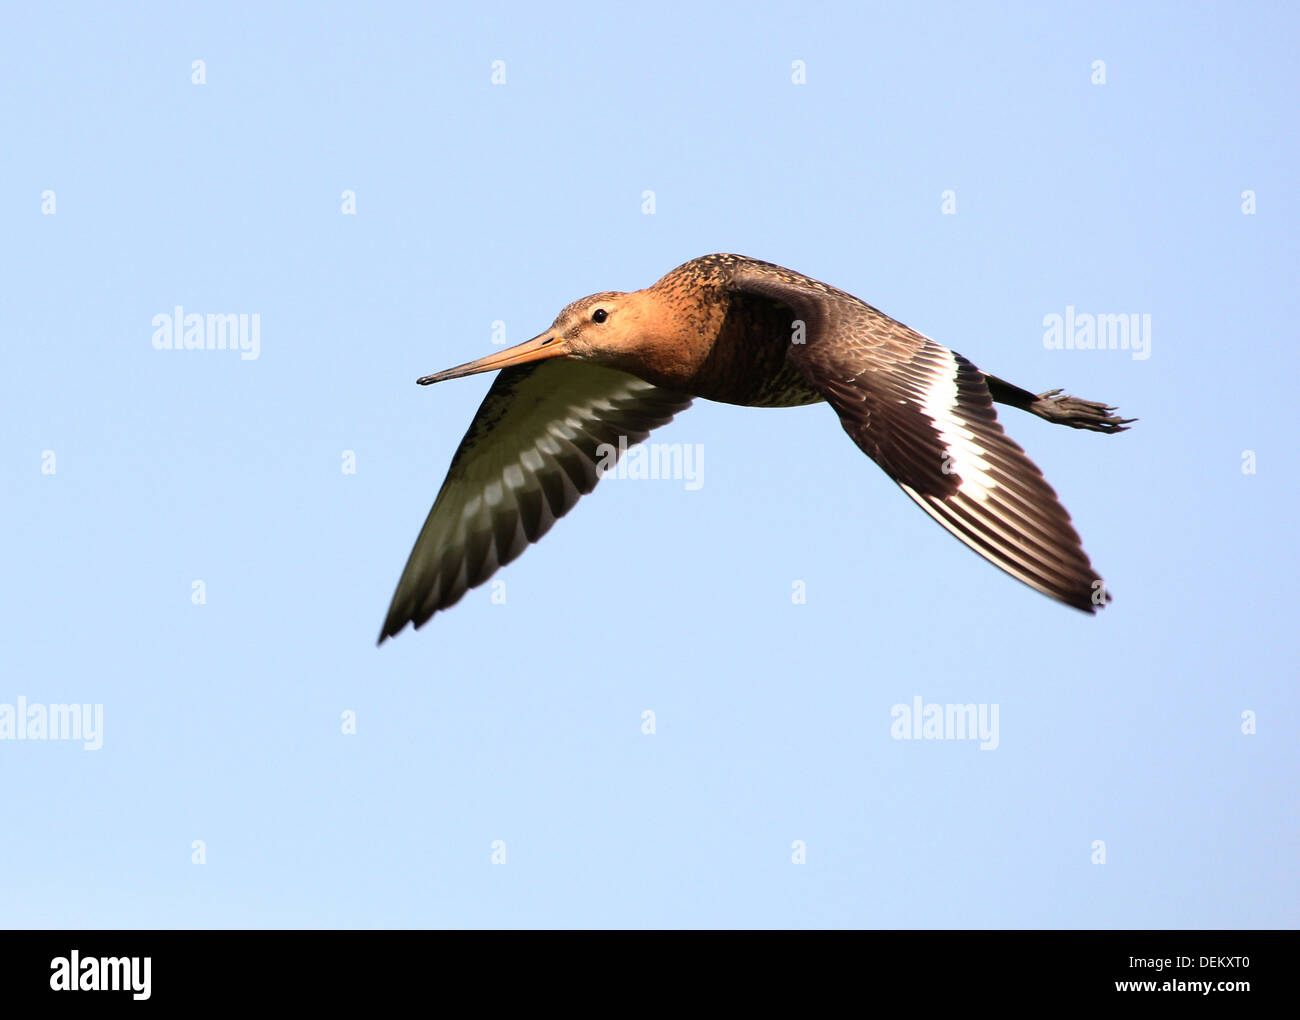 Detailed close-up of a Black-tailed Godwit (Limosa limosa) in flight Stock Photo